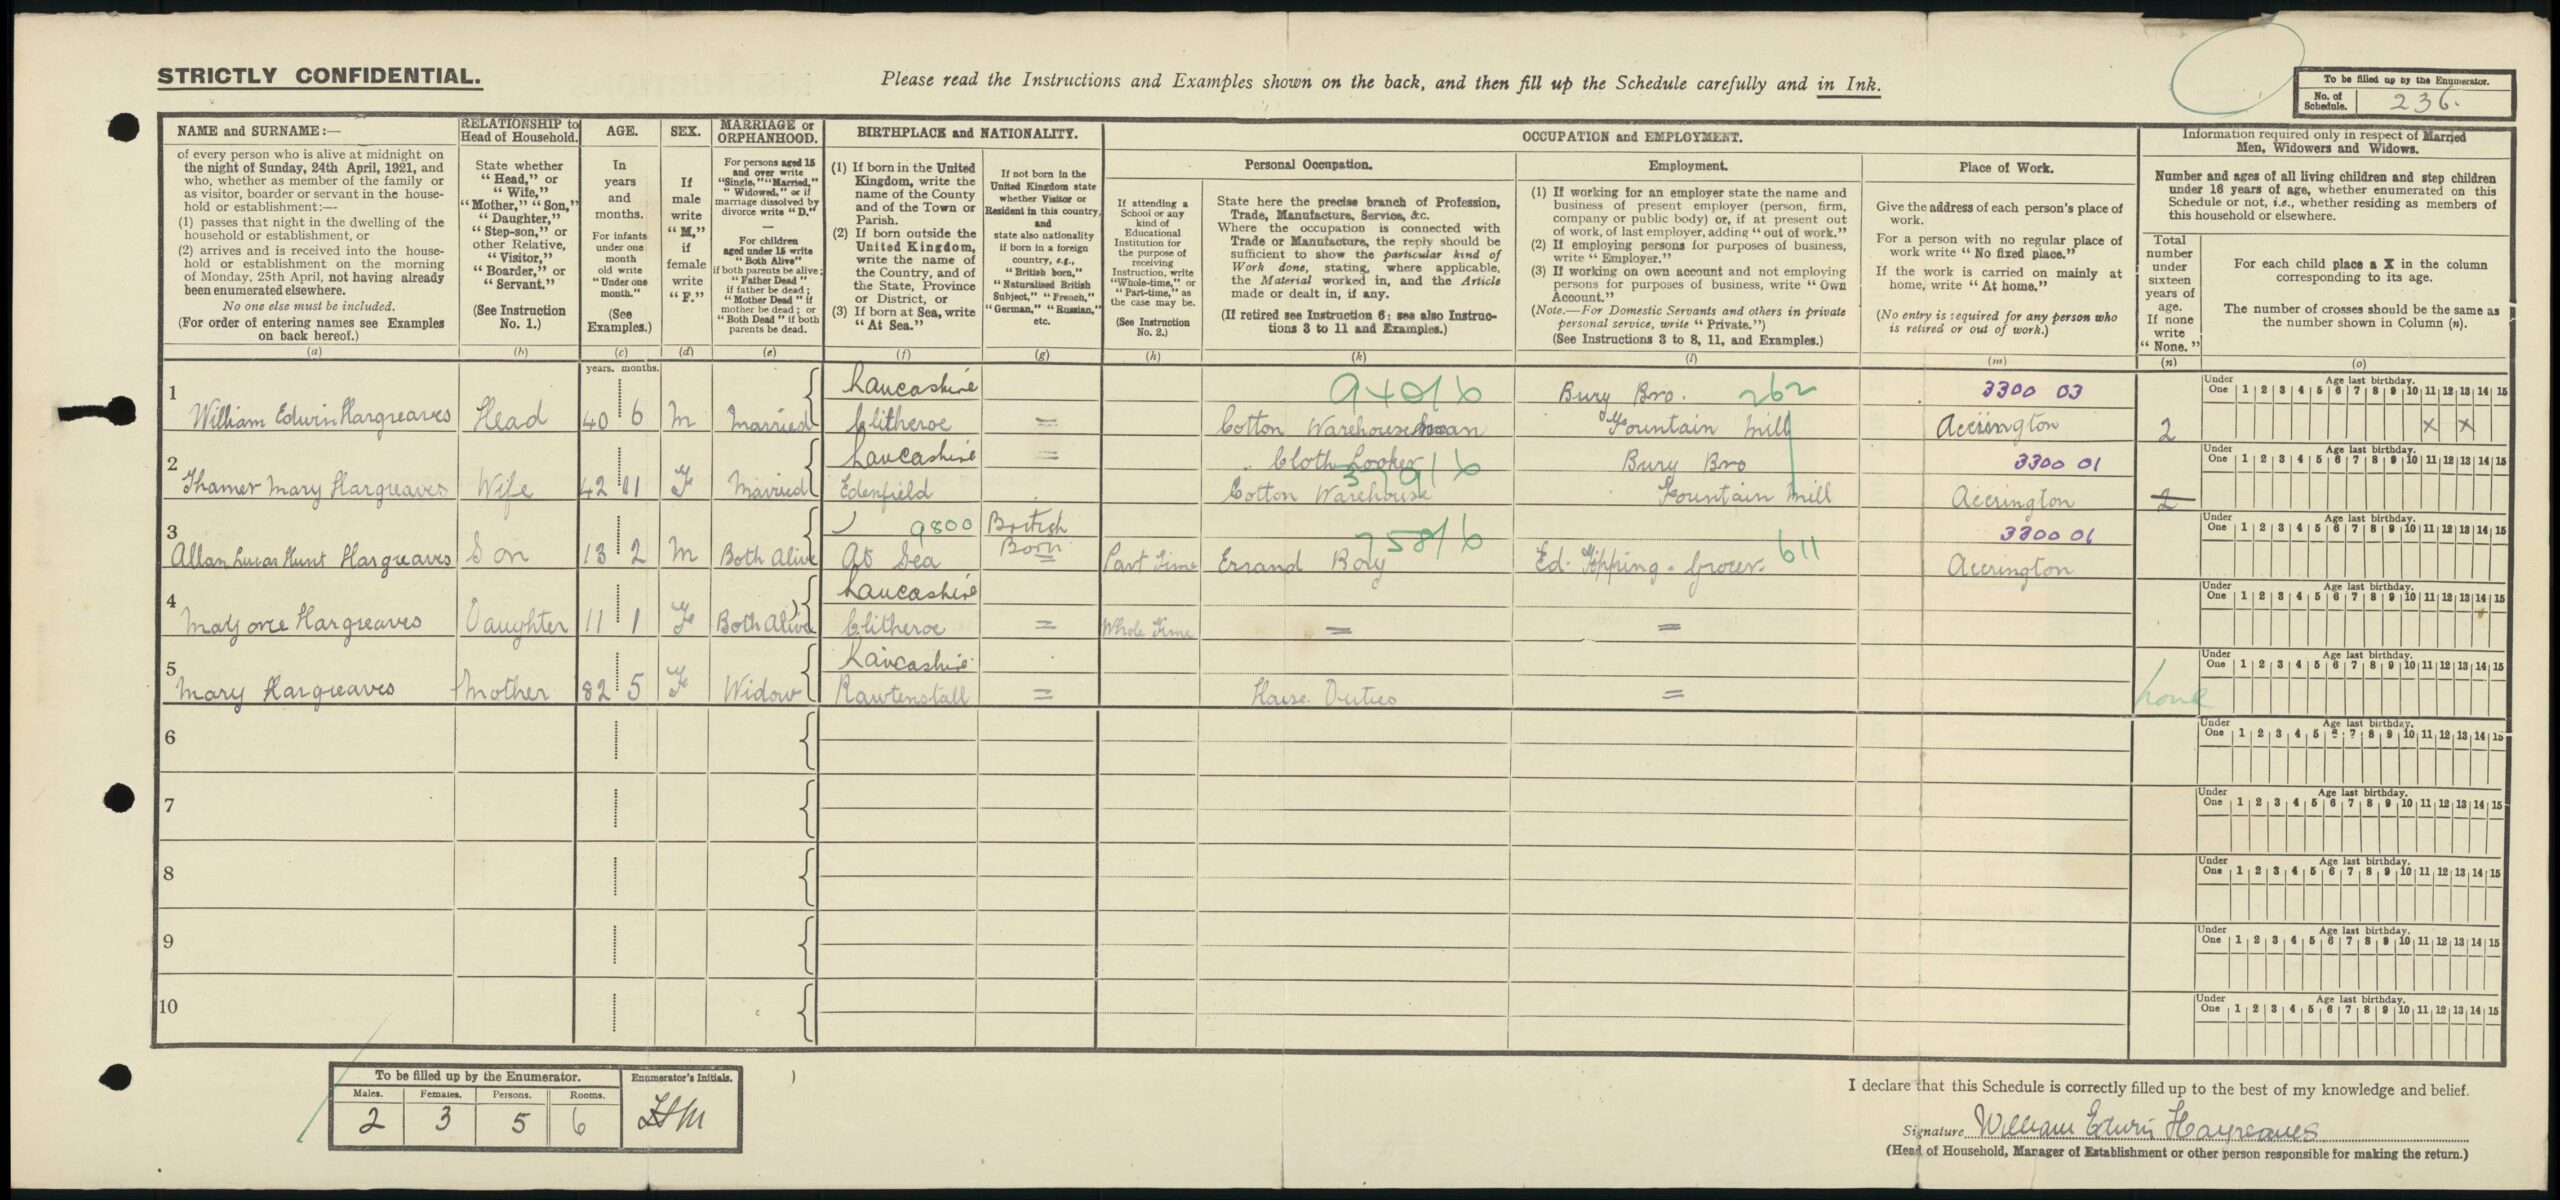 68 Park Road census entry